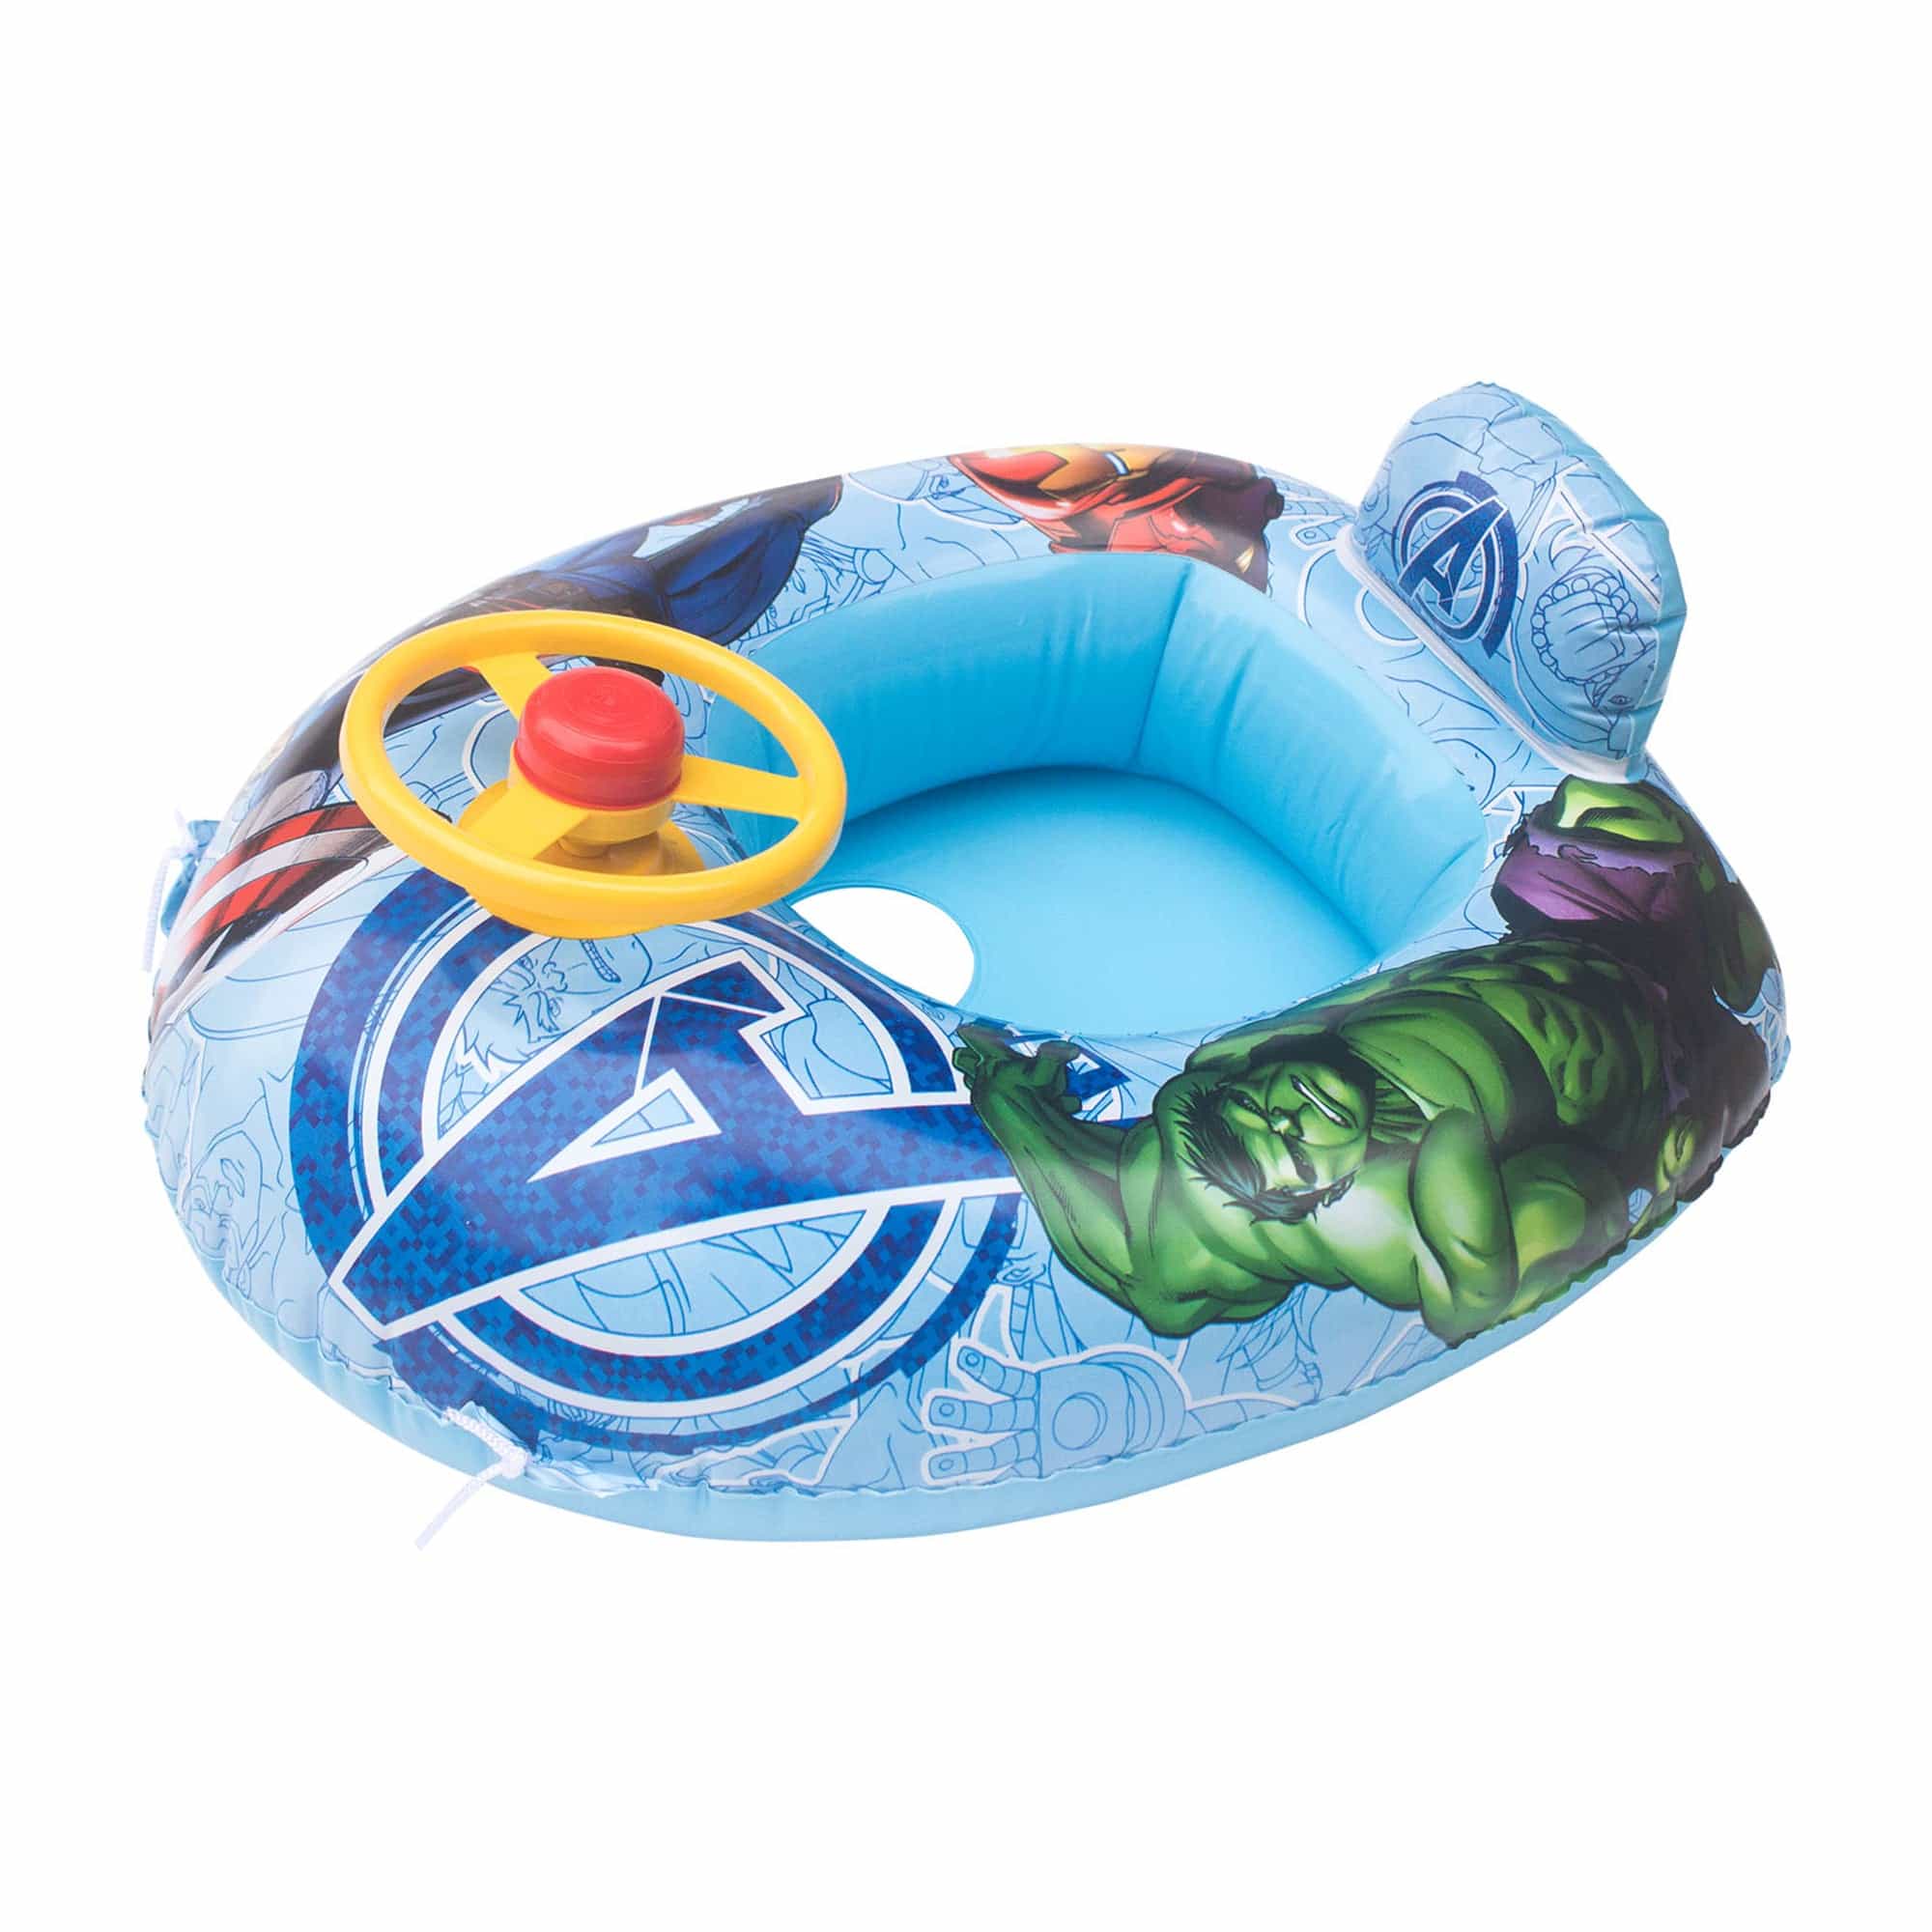 Marvel Avengers Inflatable Swim Boats for Kids, Beach Floaties for Summer Swim Party, Leakage Proof Valve Design || 3-8 Years - Toys4All.in